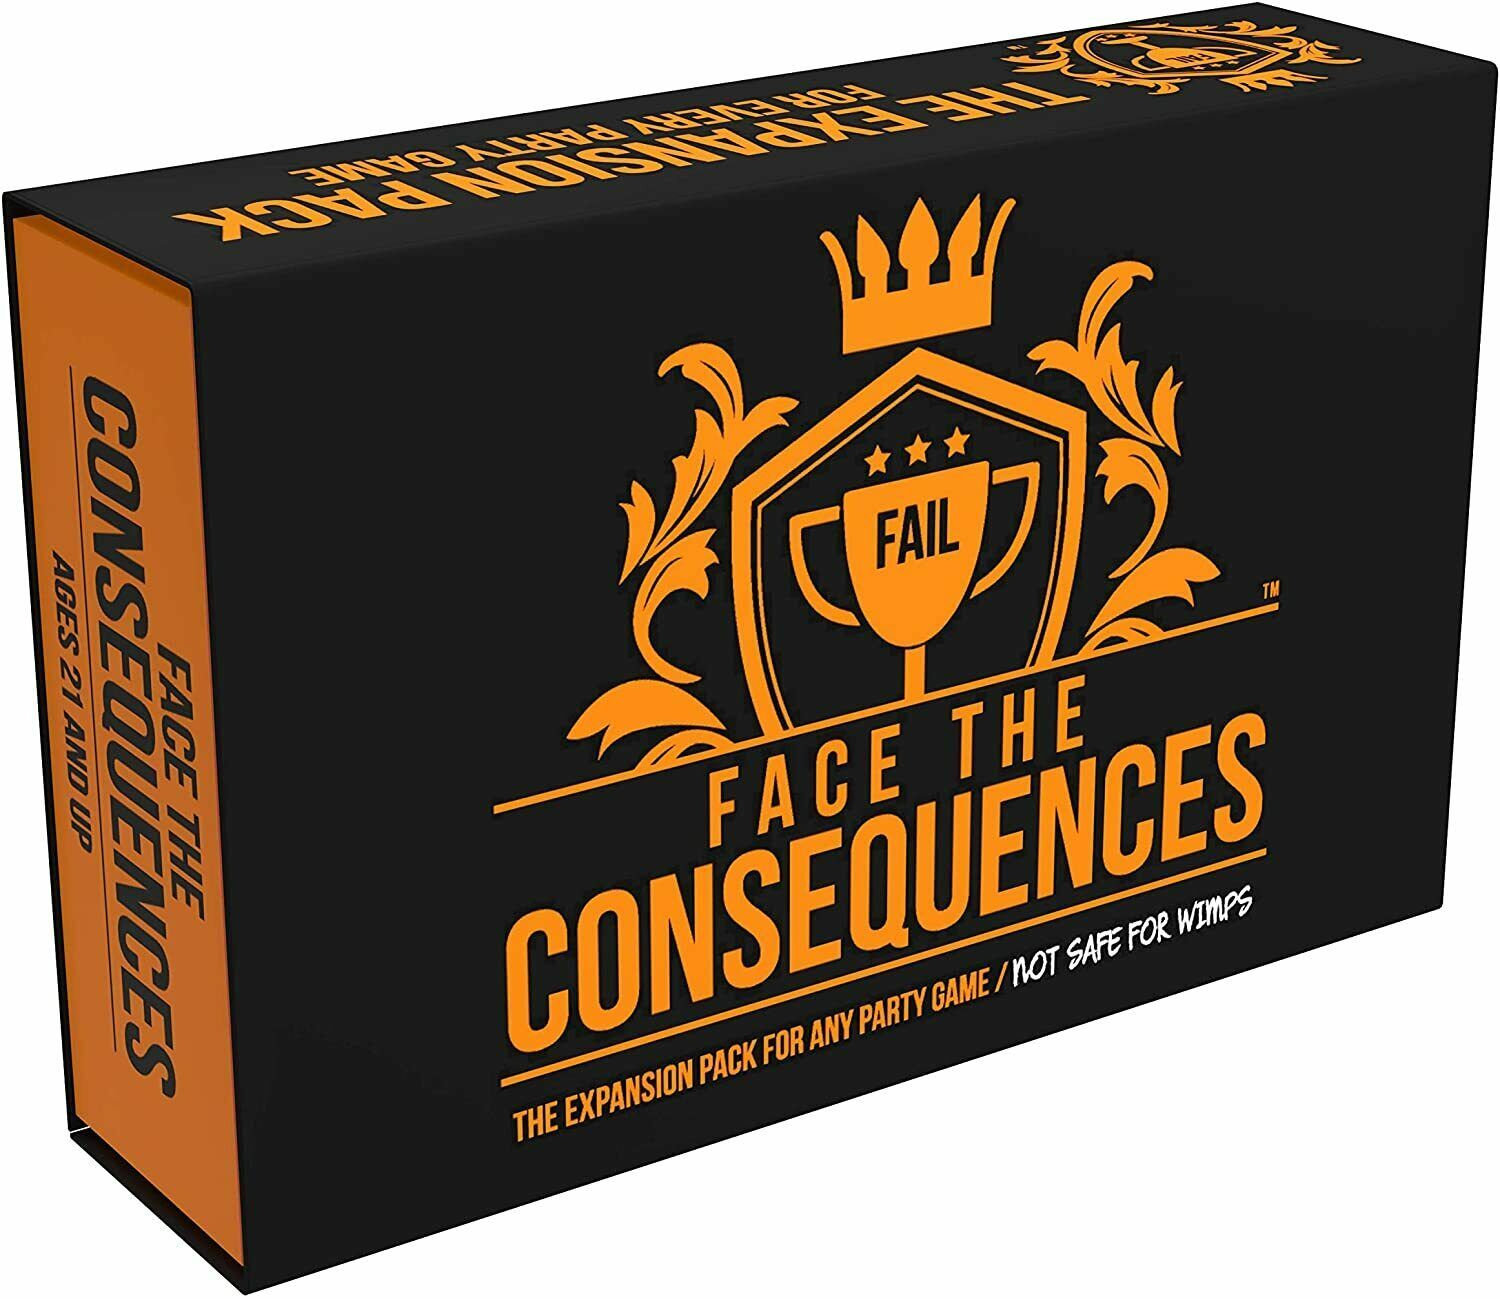 NEW Face The Consequences expansion pack for any party game, not for wimps !!!